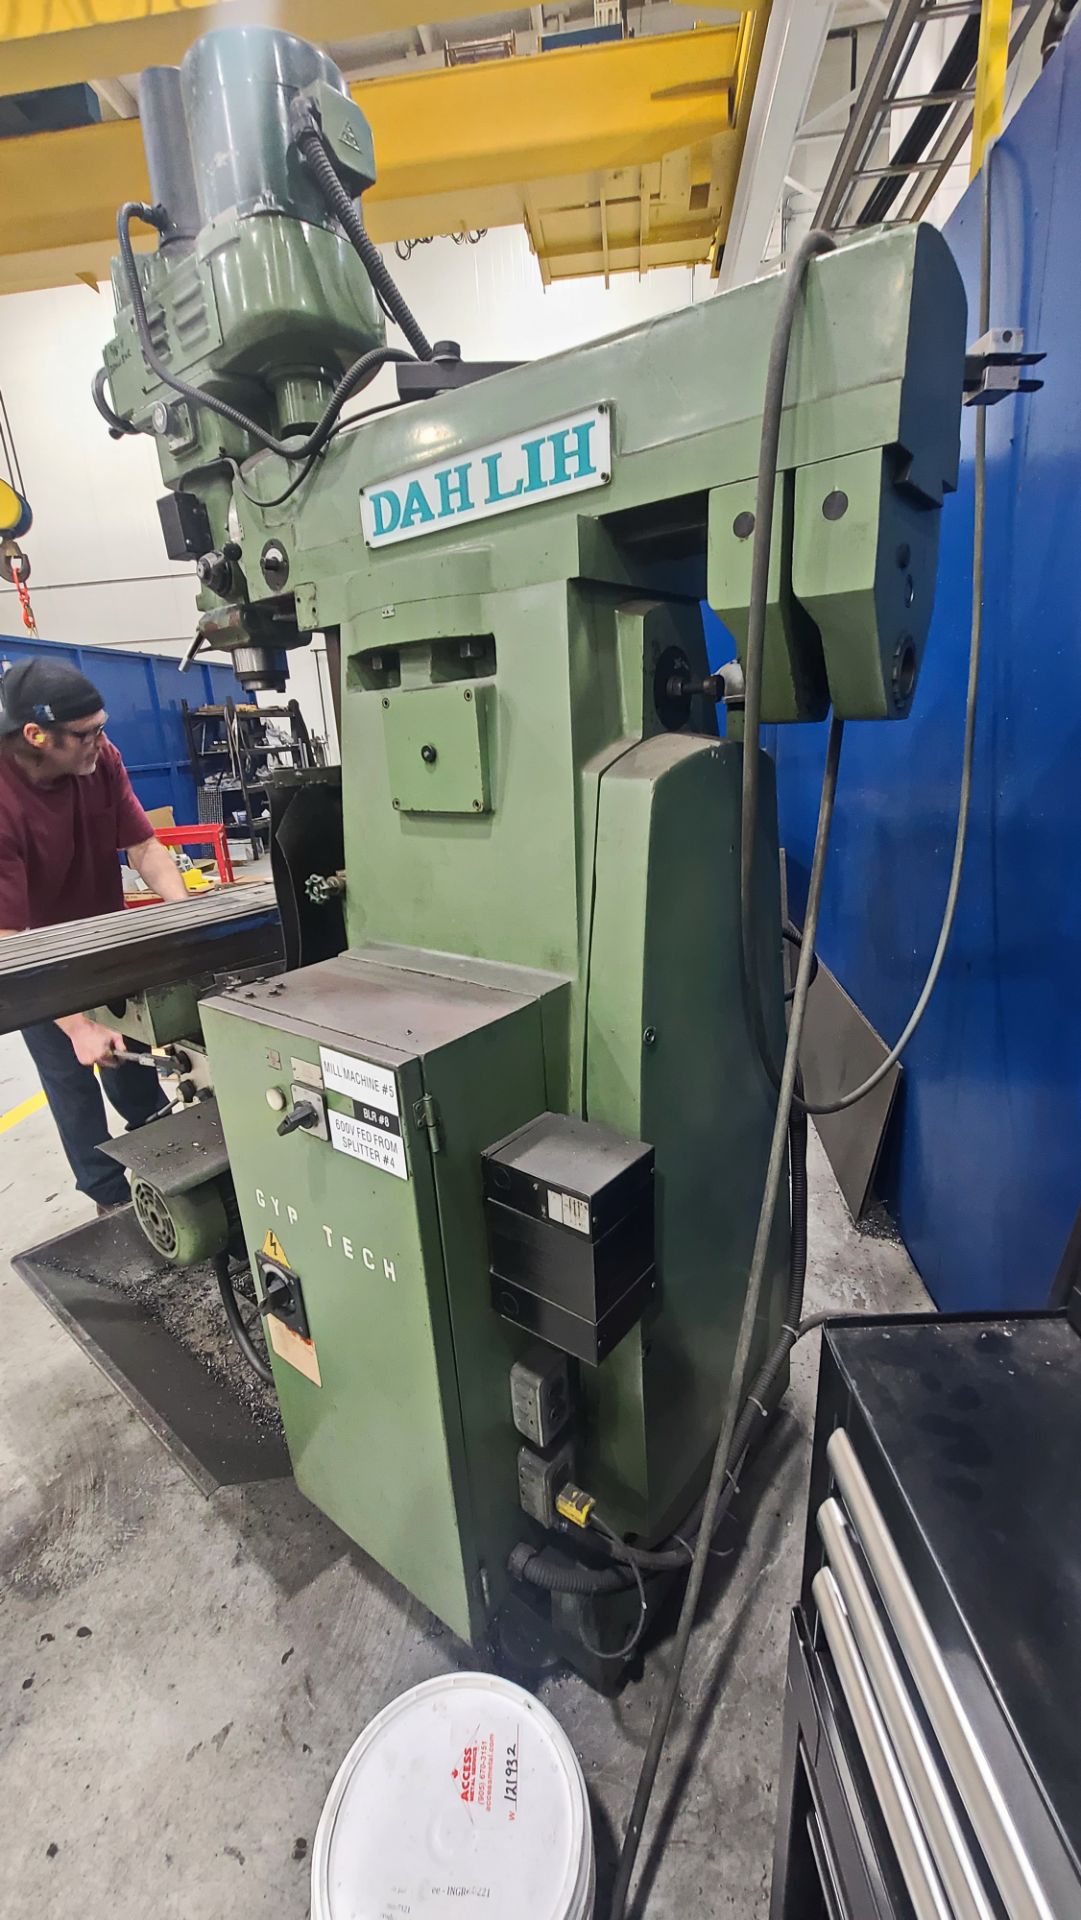 Dah-Lih DL GH950 Vertical/Horizontal Milling Machine, Adjustable Automatic Feeds, Centralized - Image 12 of 17